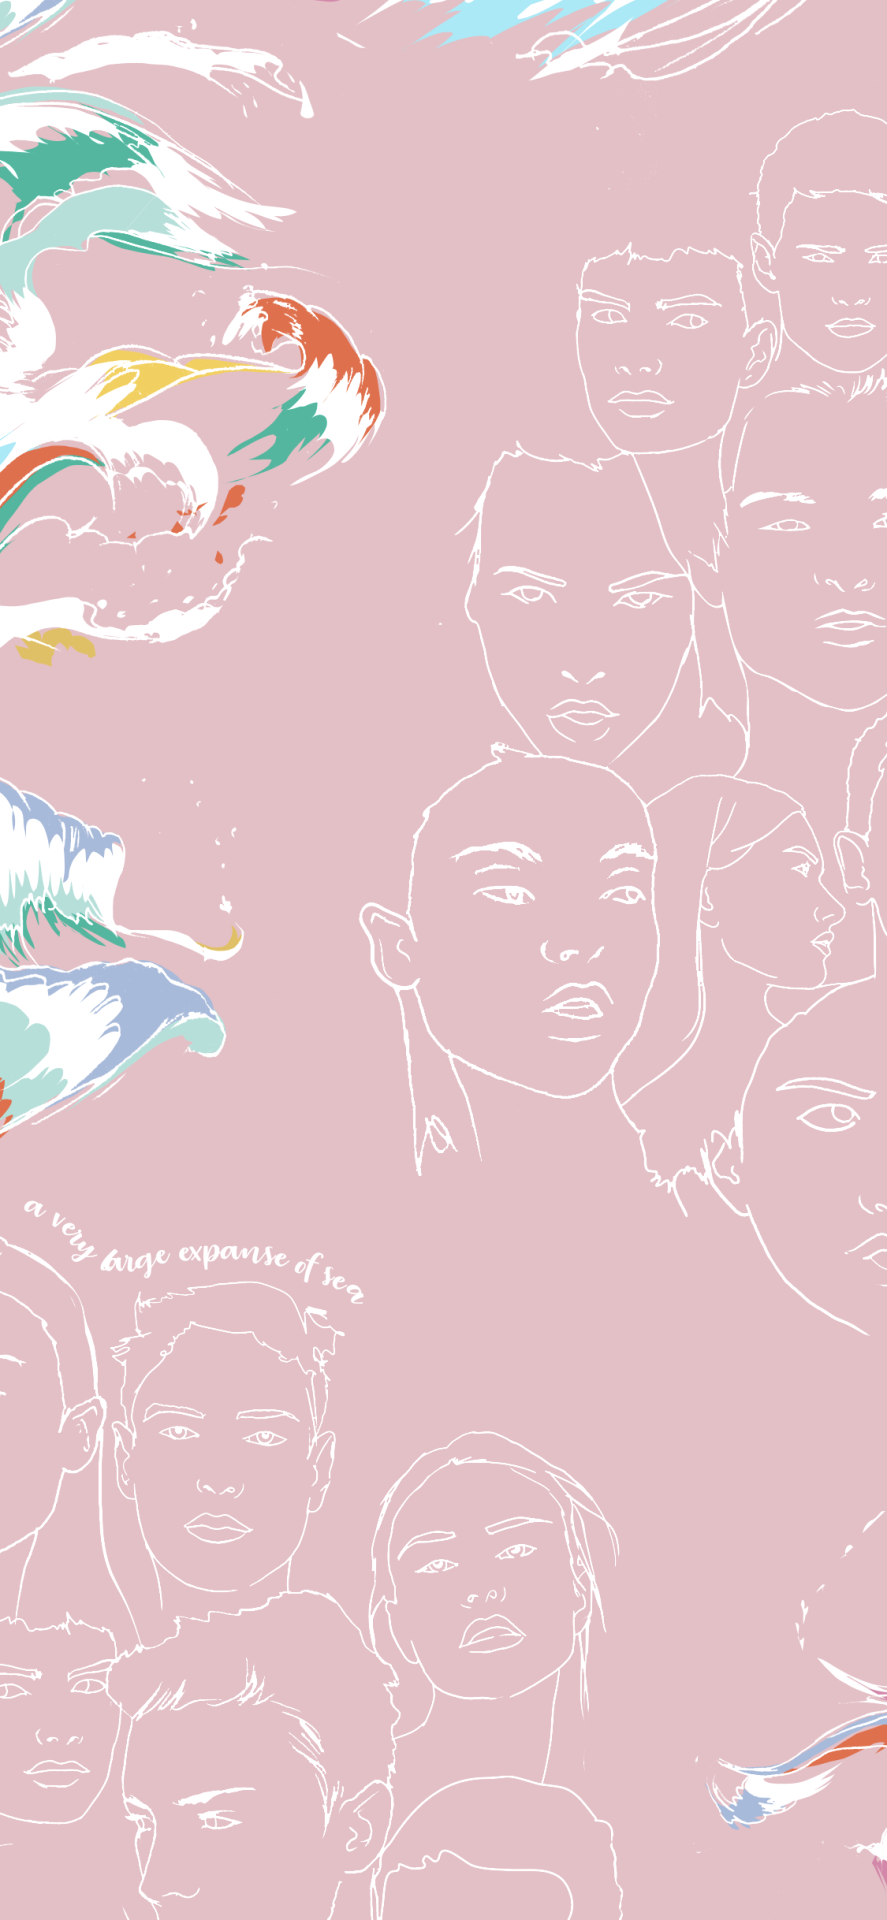 A Very Large Expanse Of Sea - Very Large Expanse Of Sea Fanart , HD Wallpaper & Backgrounds